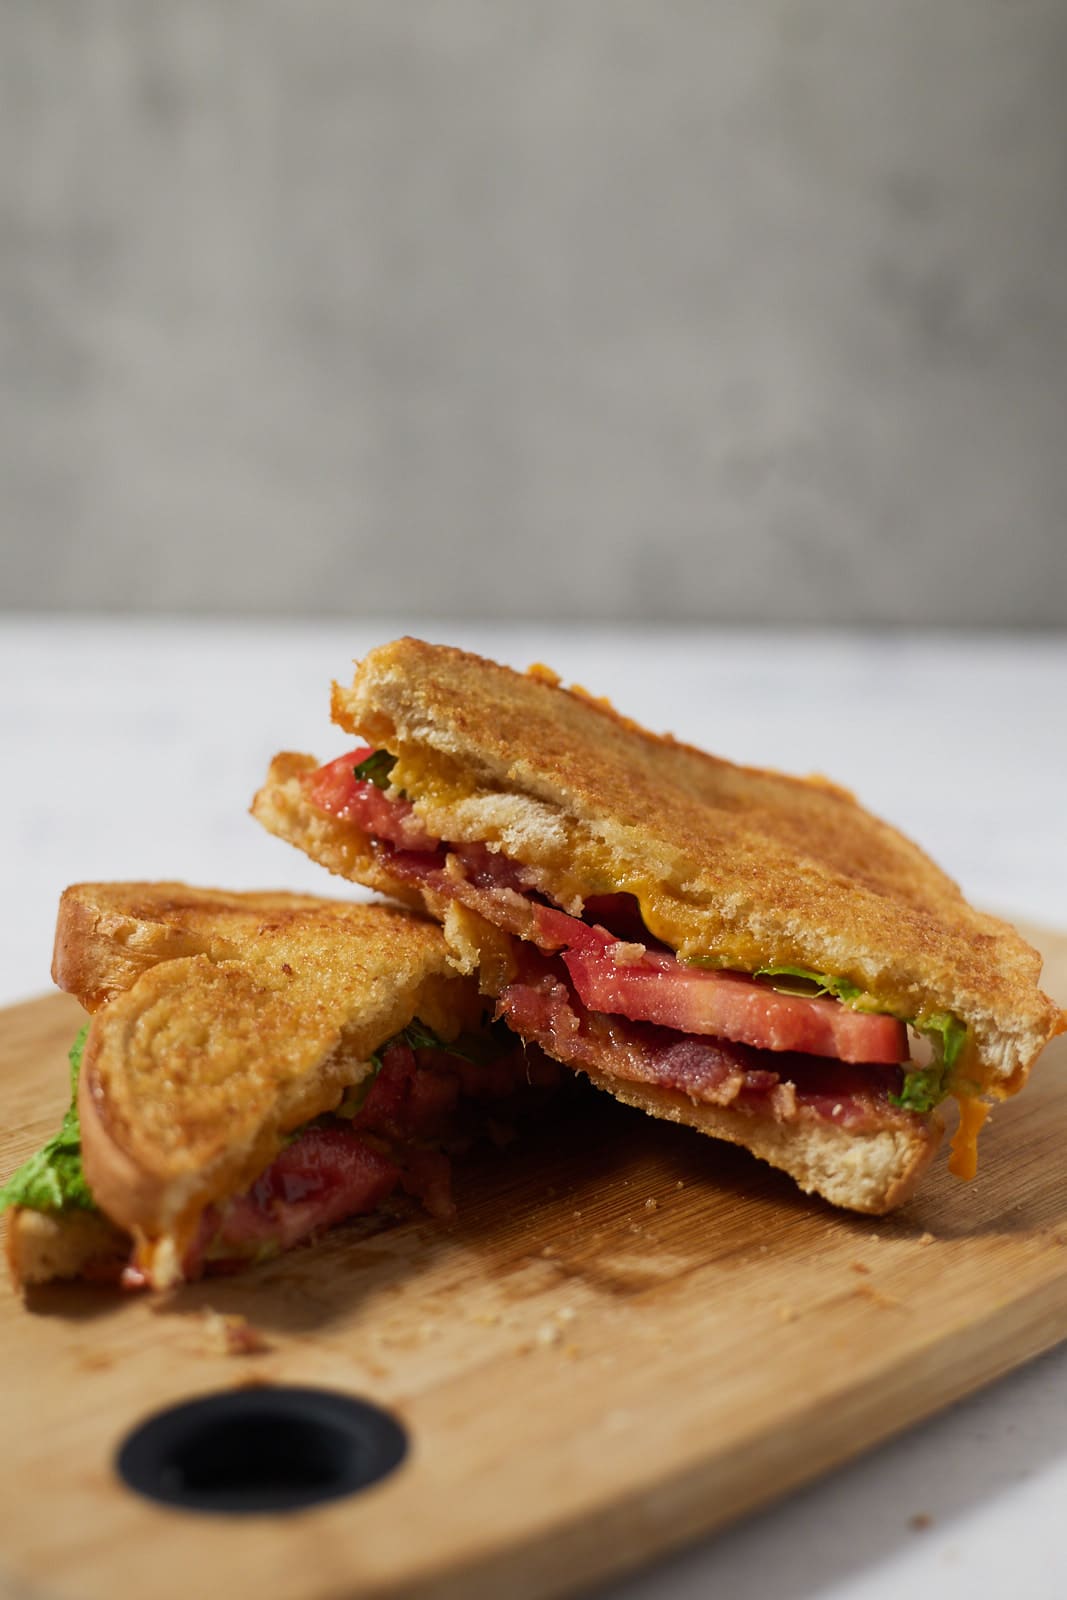 A BLT grilled cheese cut in half on a wooden chopping board.